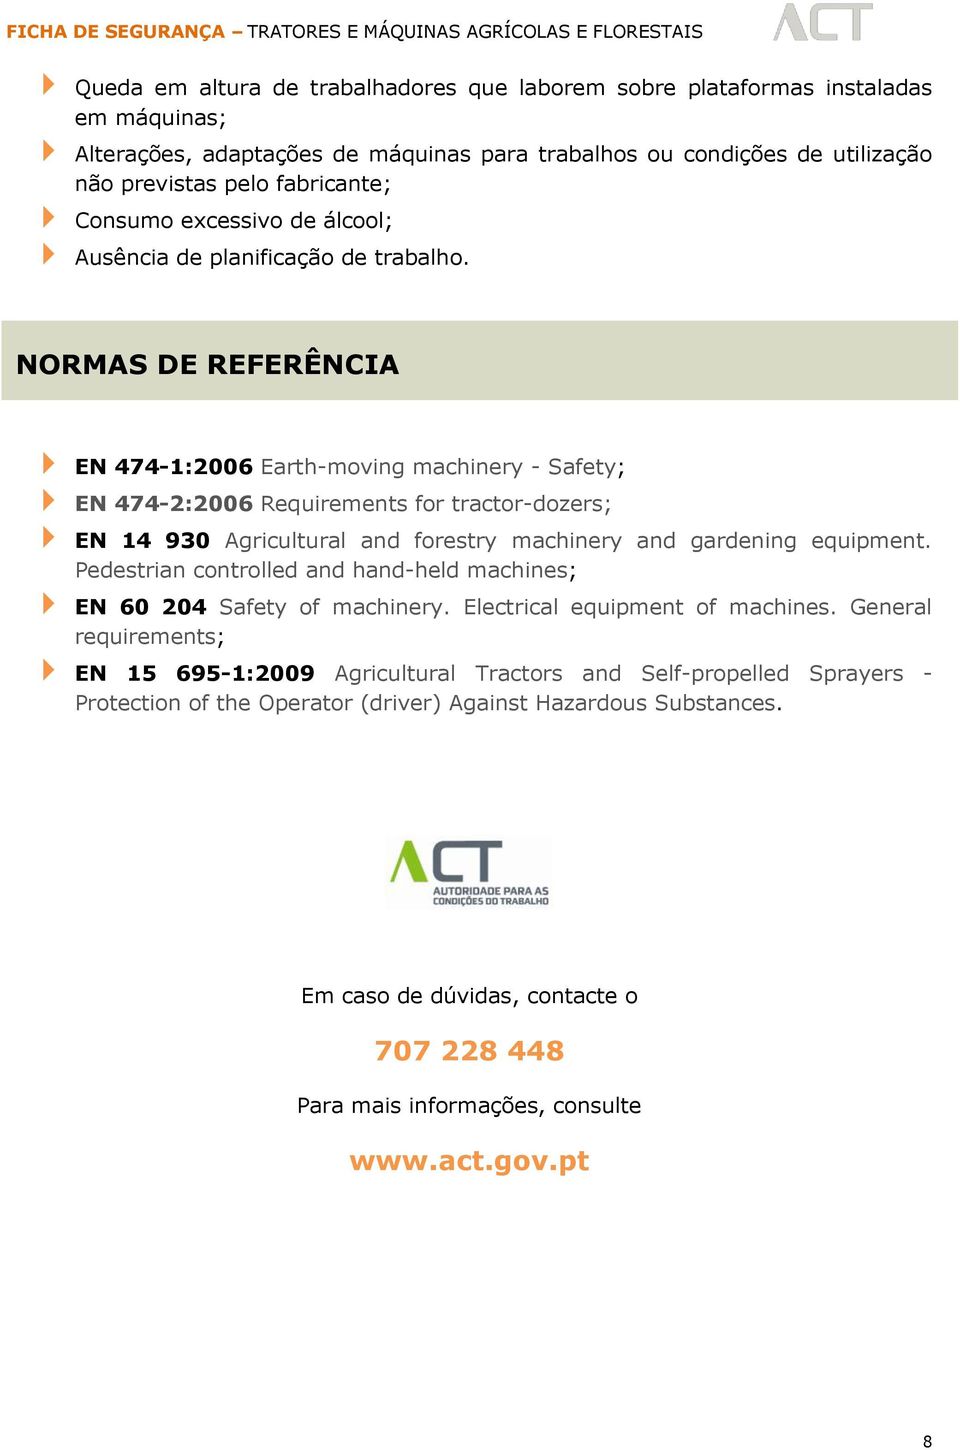 NORMAS DE REFERÊNCIA EN 474-1:2006 Earth-moving machinery - Safety; EN 474-2:2006 Requirements for tractor-dozers; EN 14 930 Agricultural and forestry machinery and gardening equipment.